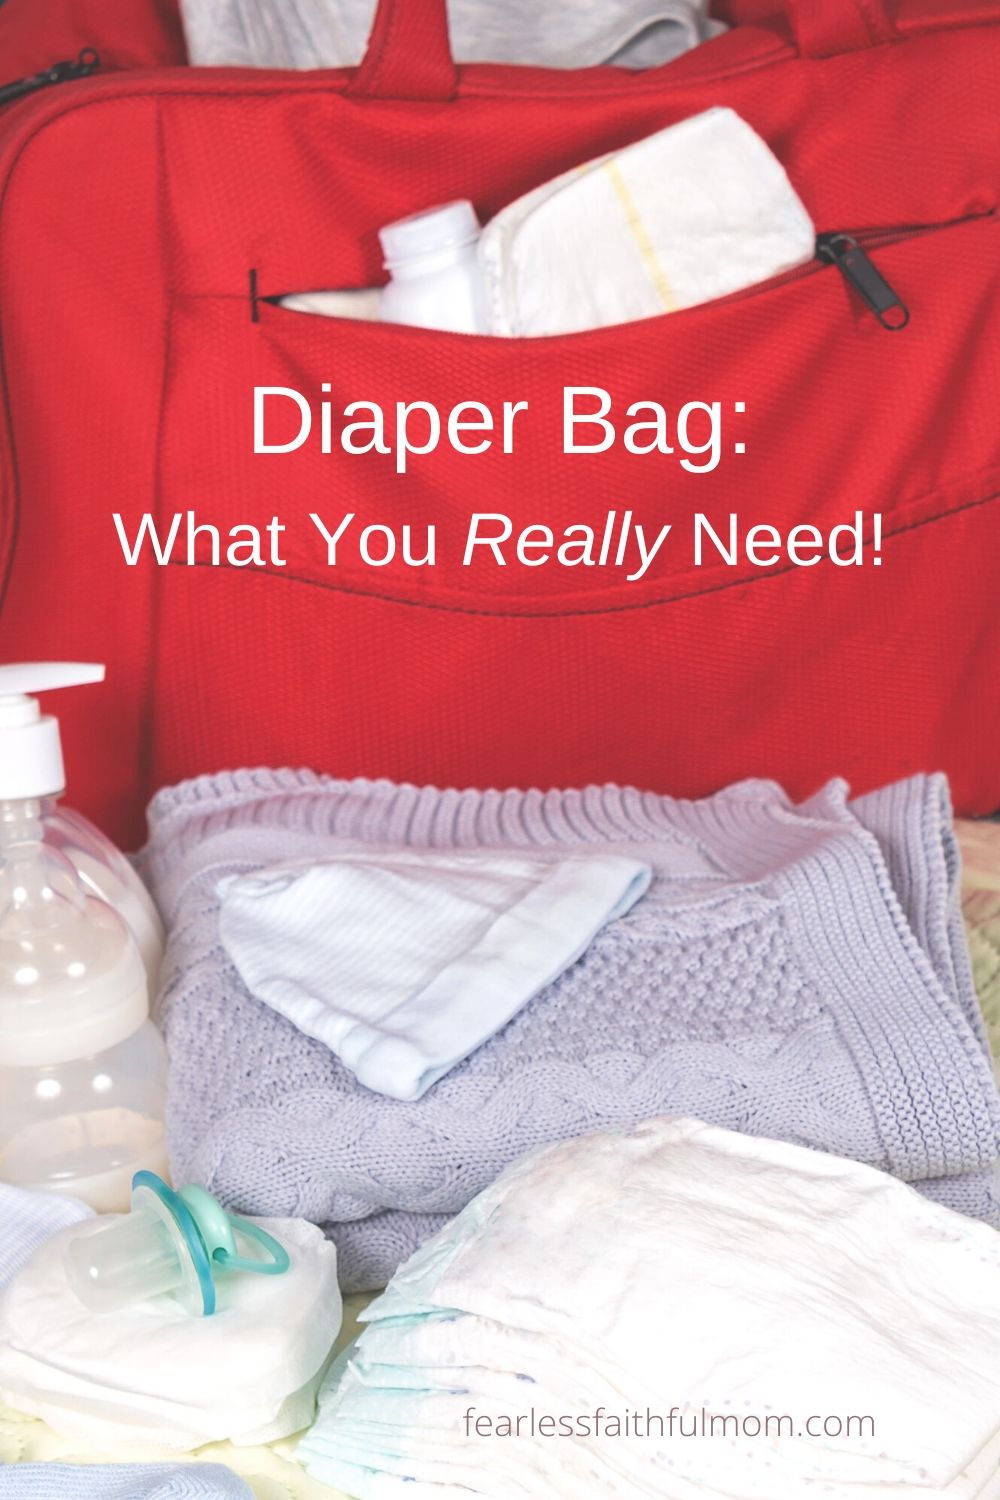 There are so many things parents are told that they 'need' for a baby. Read here to see what a diaper bag really needs, and what can be skipped! #diaperbag #motherhood #havingababy